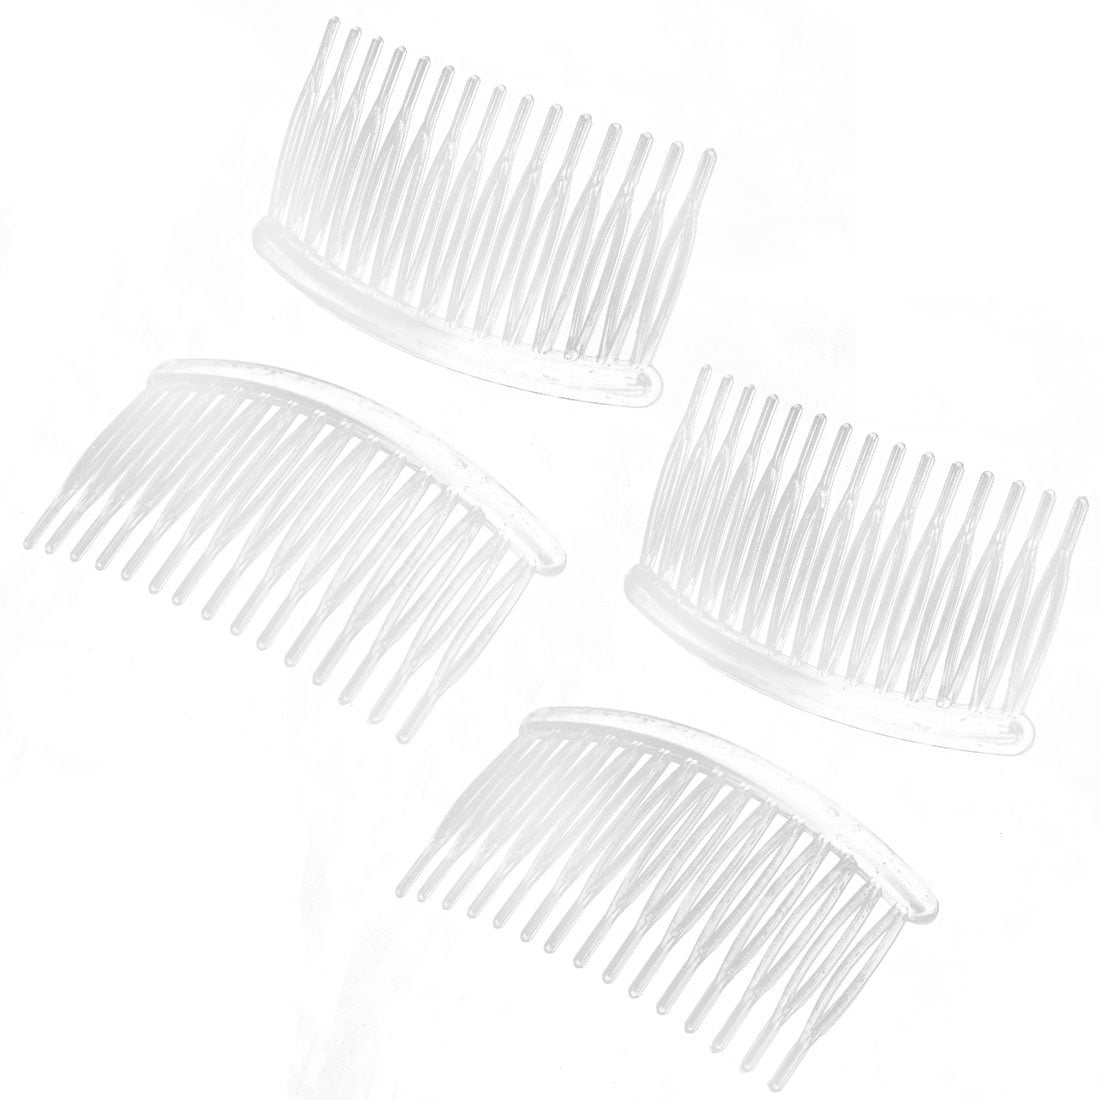 Small 2.75 inch Clear Acrylic Comb Hair Findings Craft Supplies